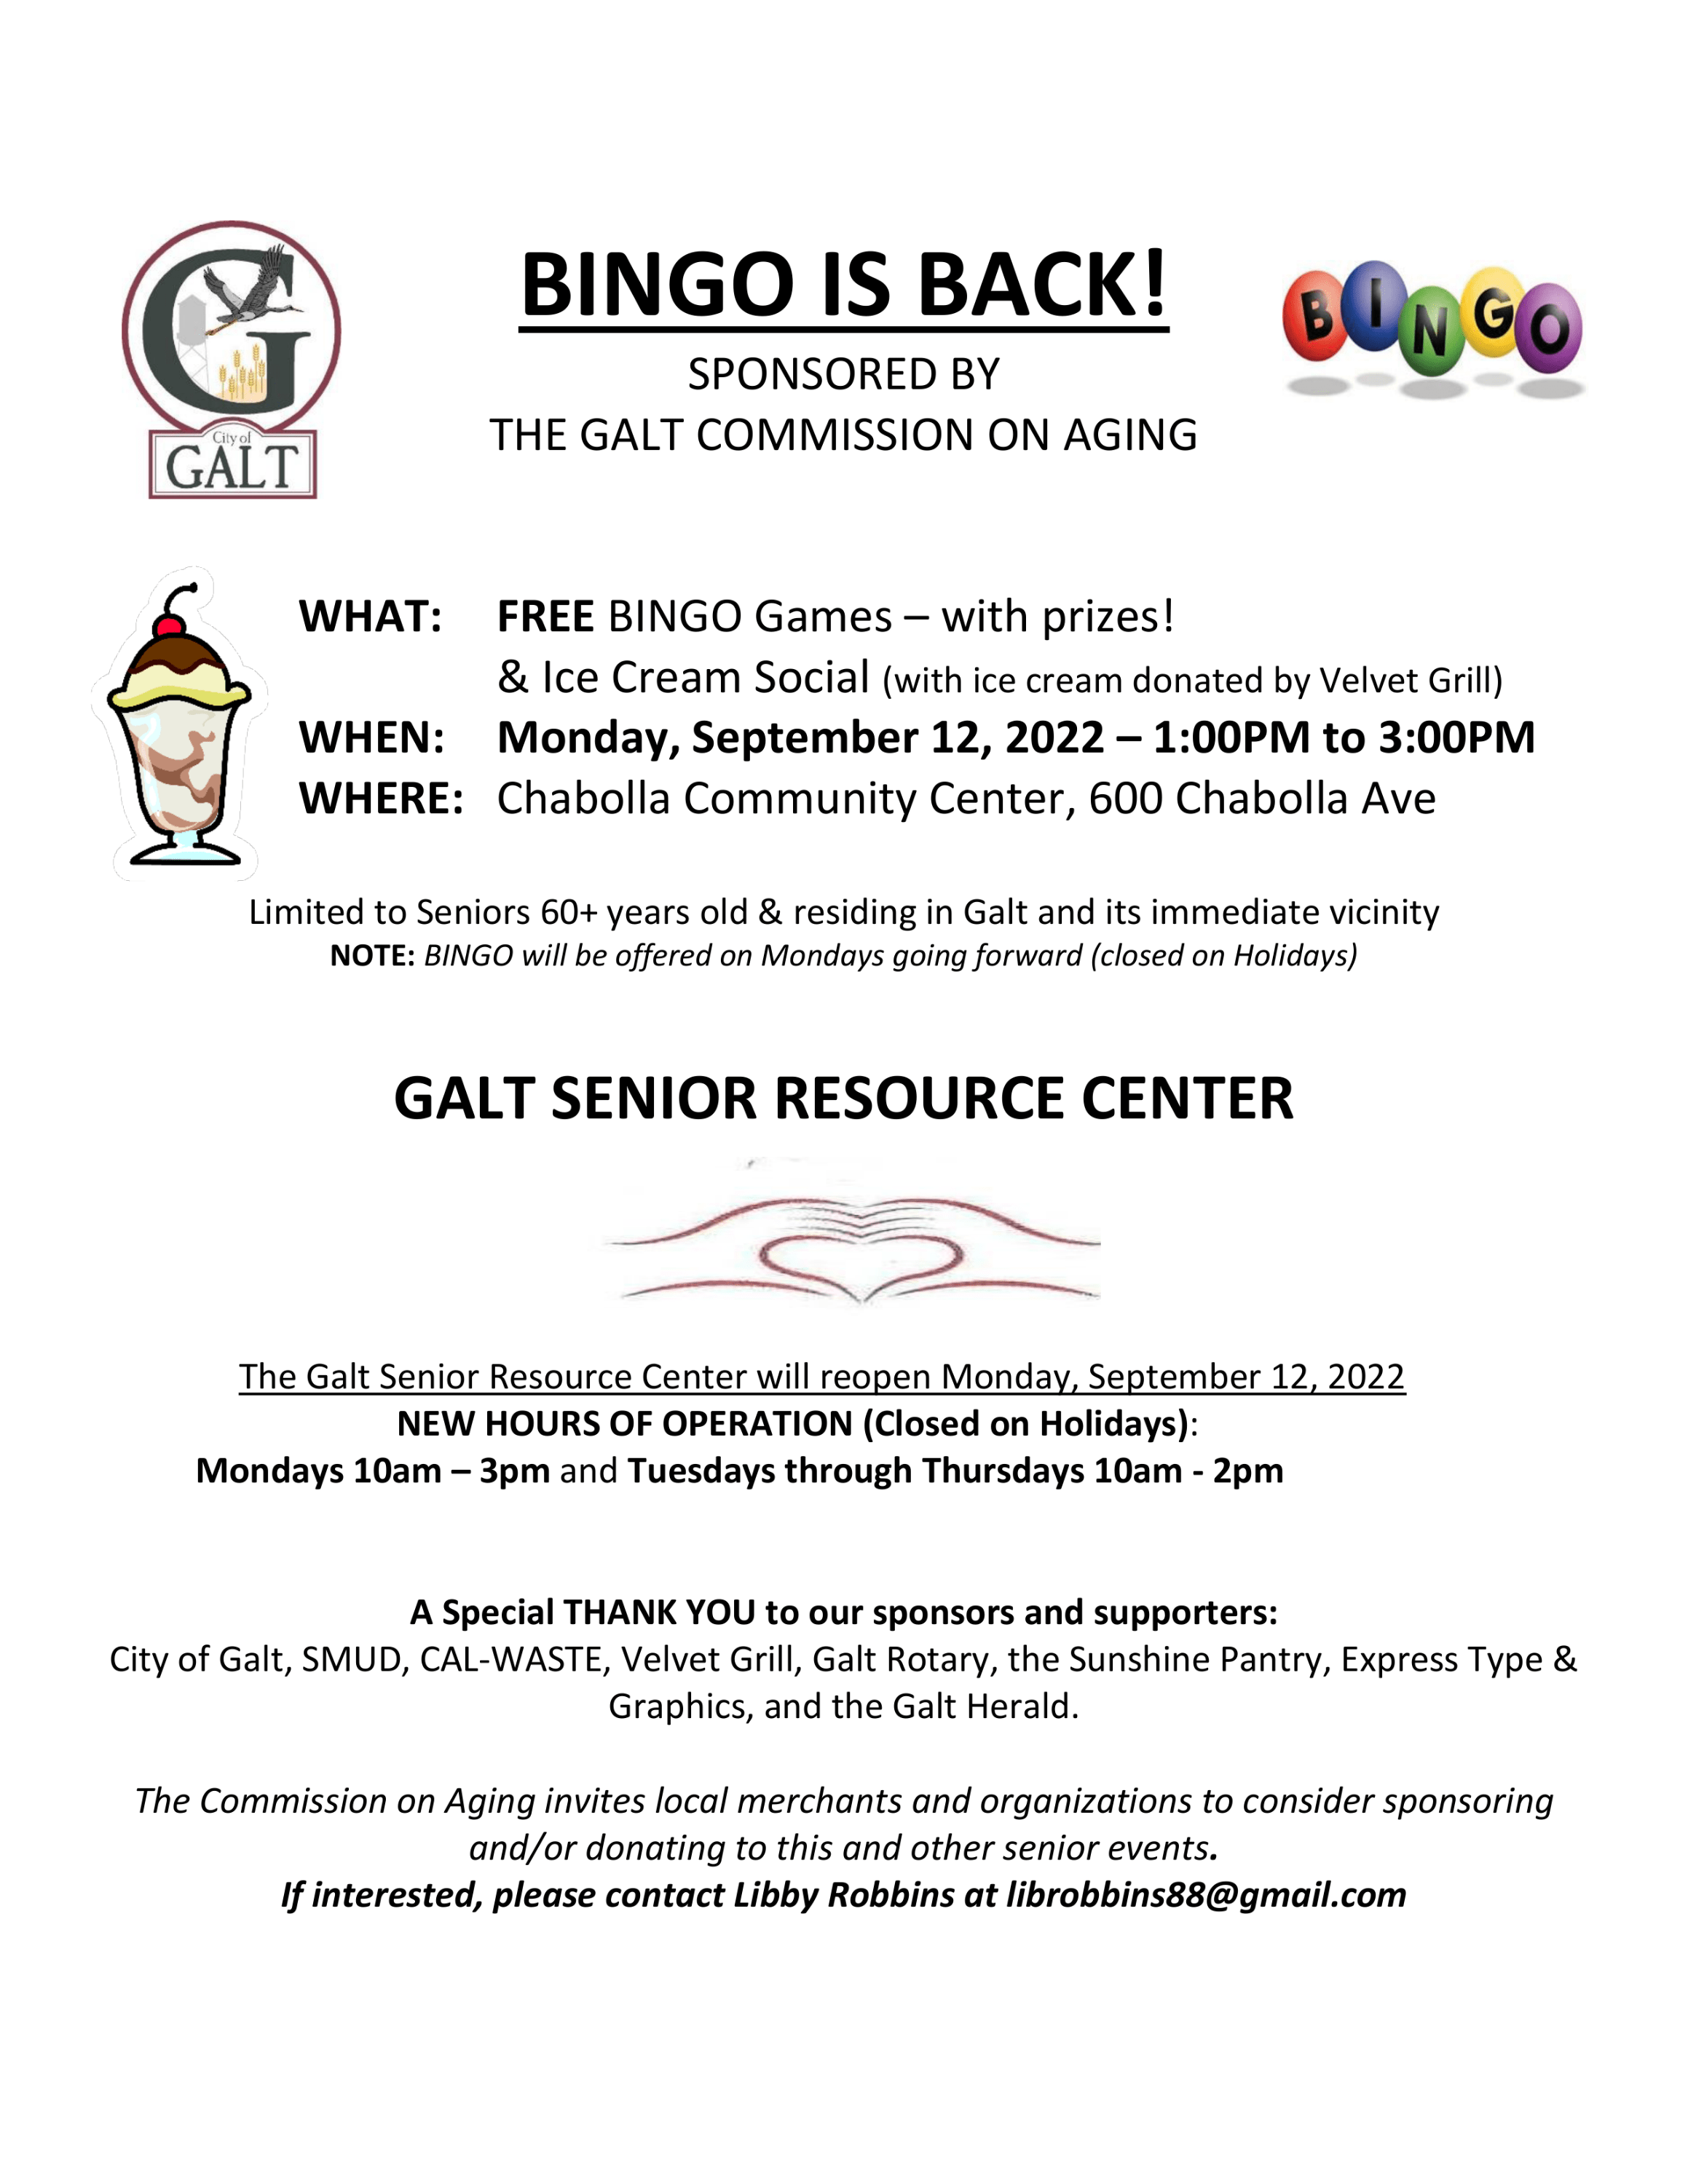 BINGO IS BACK! SPONSORED BY  THE GALT COMMISSION ON AGING. WHAT:  FREE BINGO Games – with prizes!  & Ice Cream Social (with